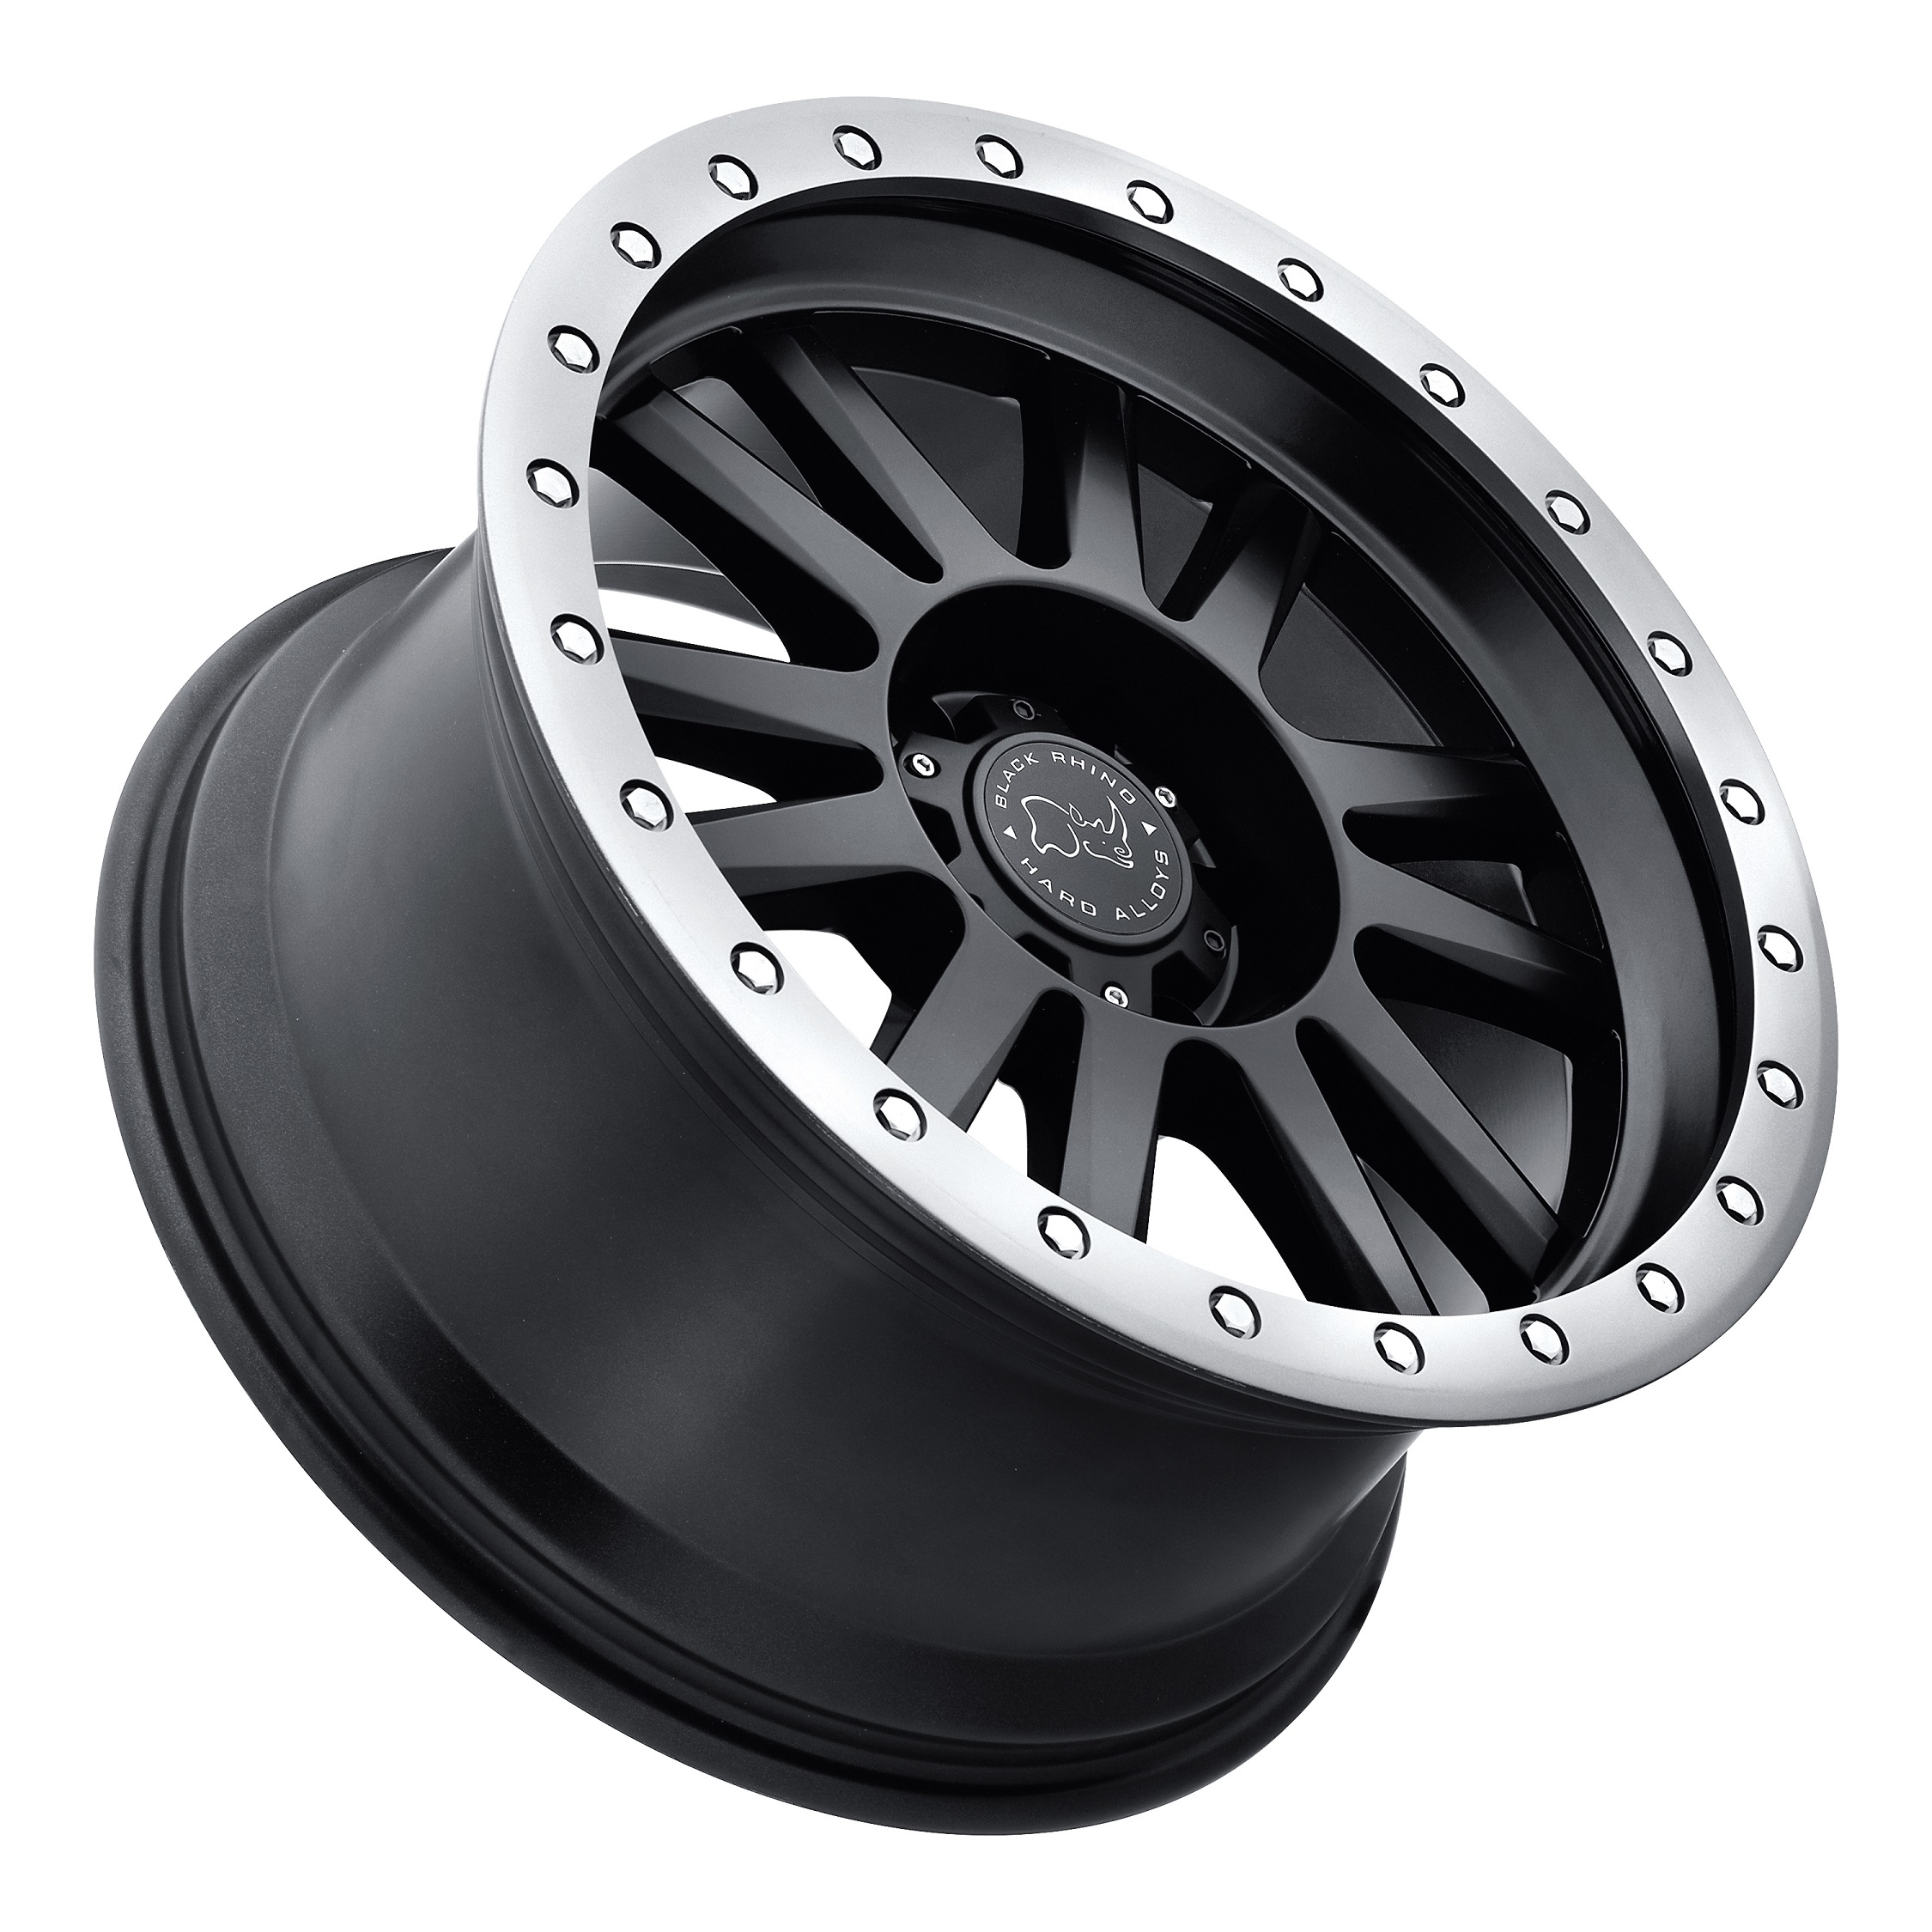 Black Rhino Introduces Heavy Duty New Truck Wheels Aimed at Tuners, Off